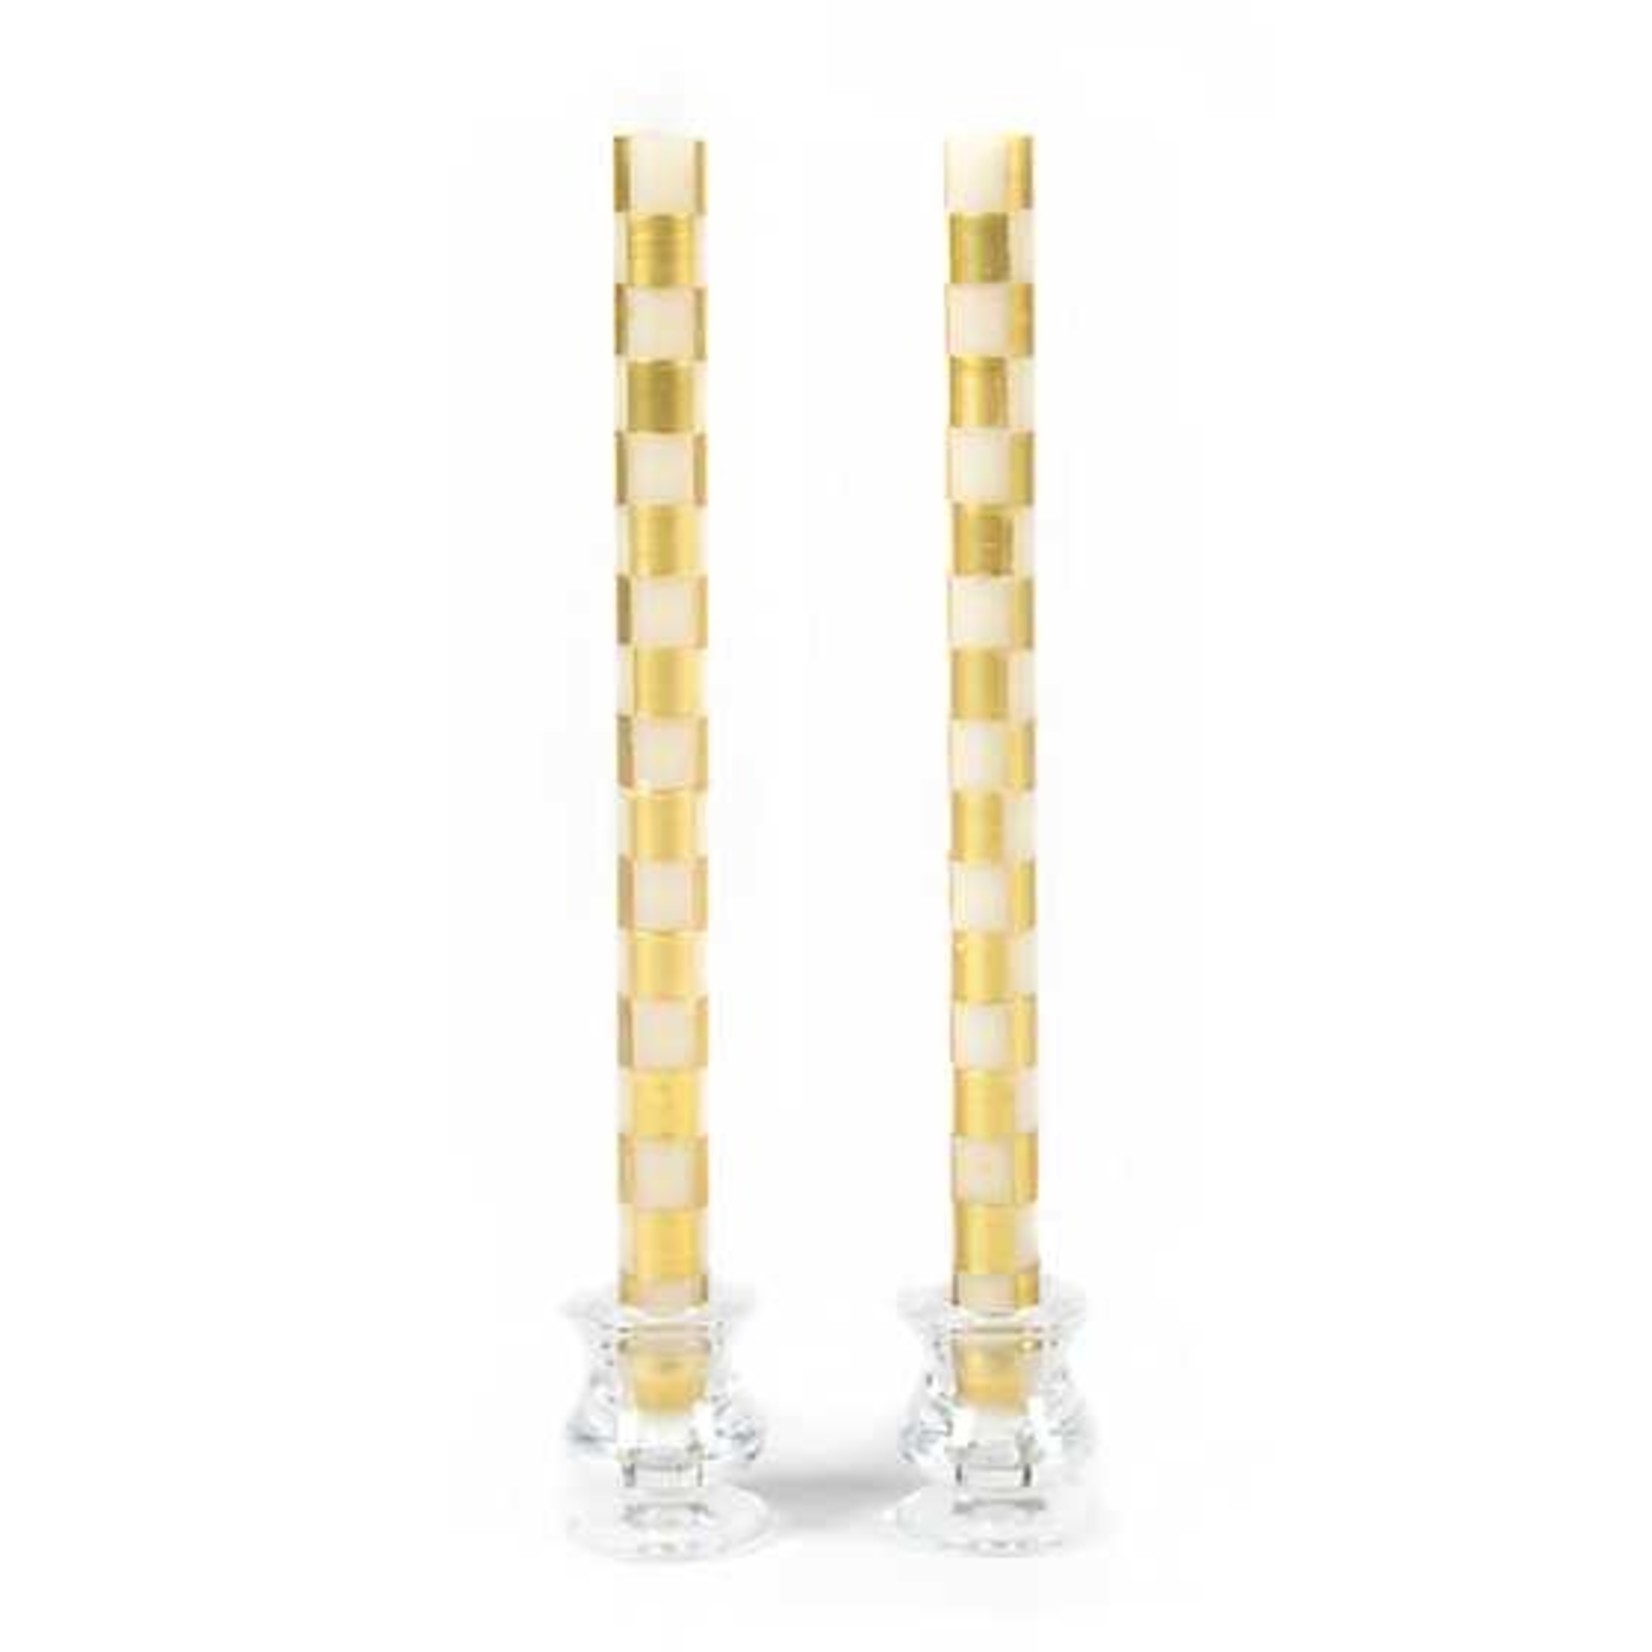 MacKenzie Childs Check Dinner Candles - Gold & Ivory - Set of 2